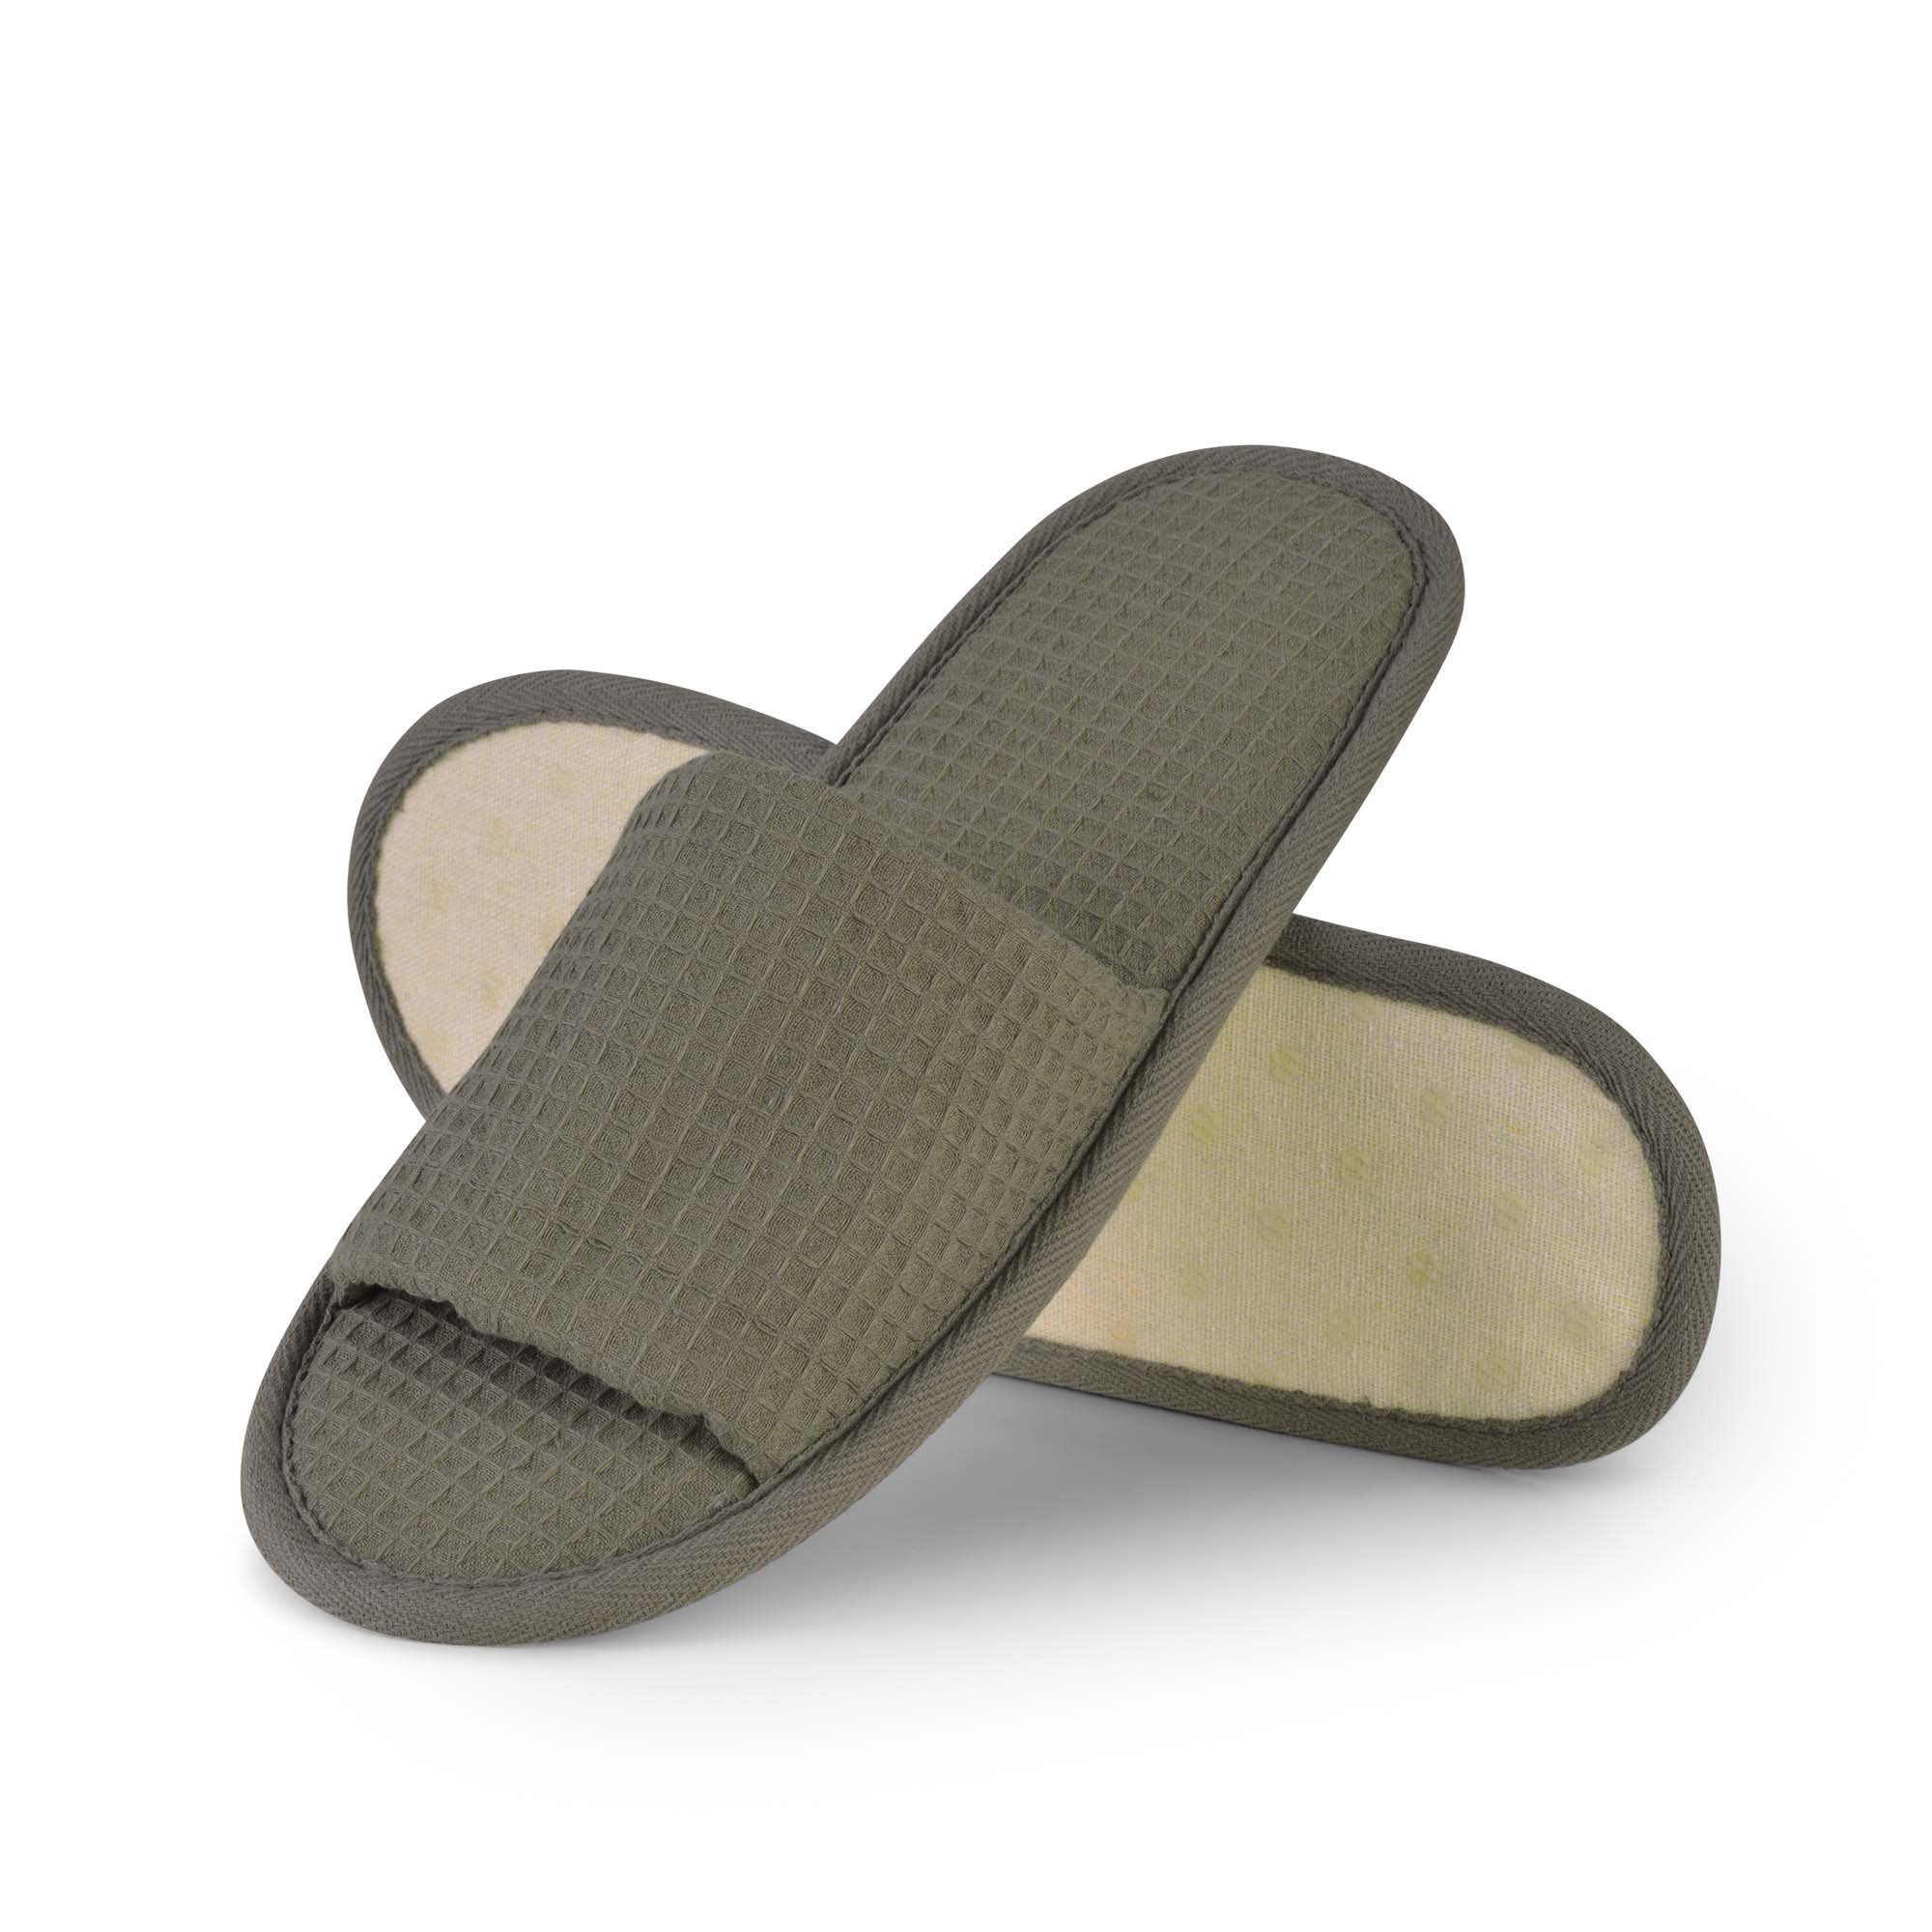 Biodegradable Eco friendly 100% Natural Open Toe Waffle Green Slippers.jpg